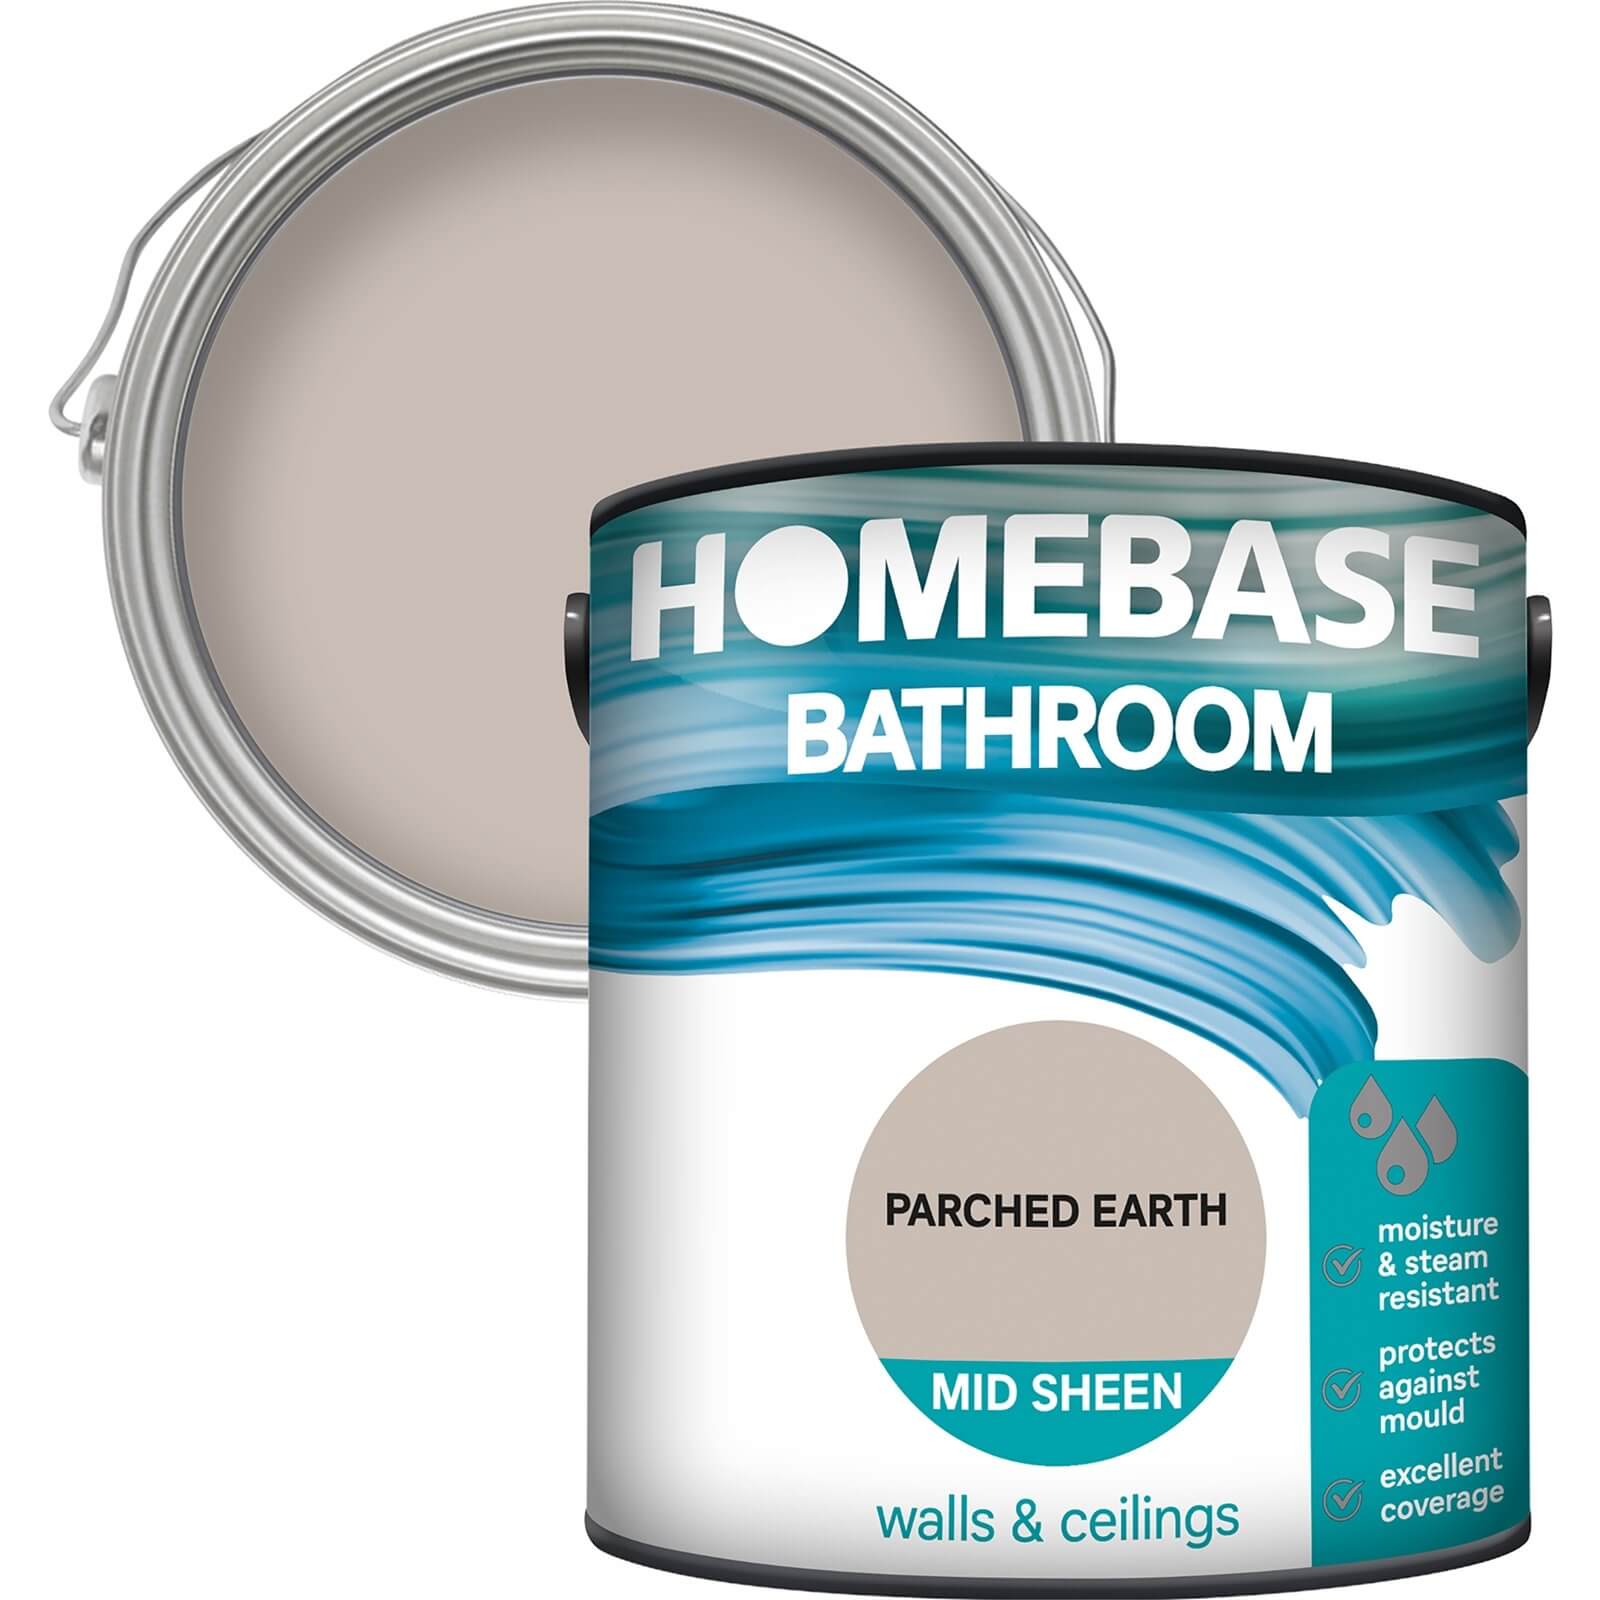 Homebase Bathroom Mid Sheen Paint - Parched Earth 2.5L